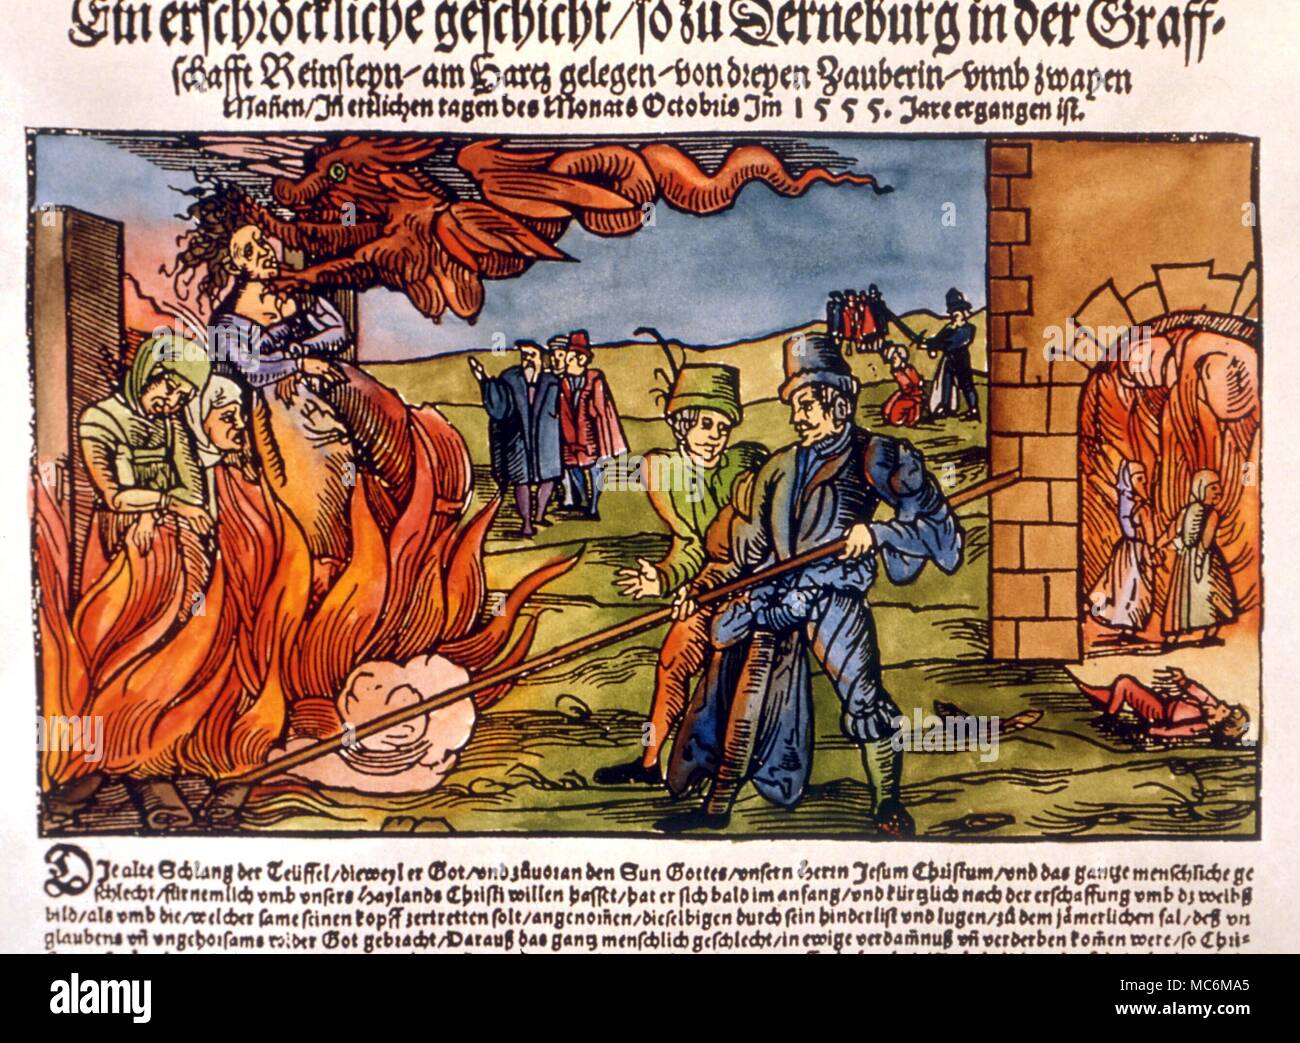 witchcraft-witch-burning-witches-being-burned-at-derneburg-in-1555-hand-coloured-contemporary-woodcut-MC6MA5.jpg